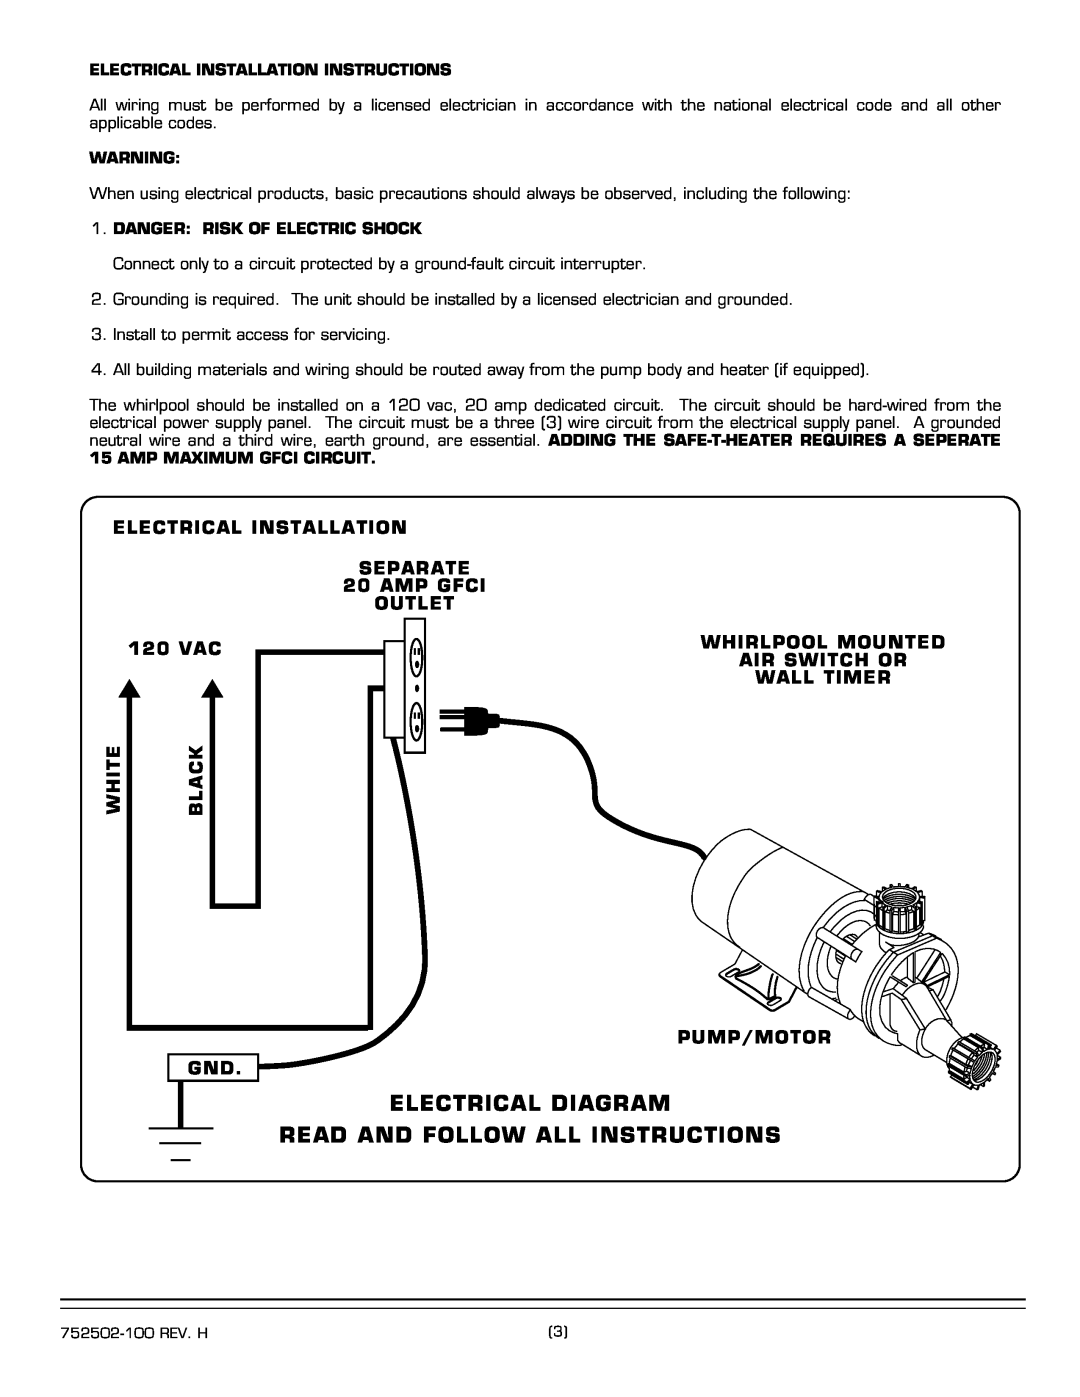 American Standard 2774.XXXW installation instructions Electrical Diagram Read And Follow All Instructions 